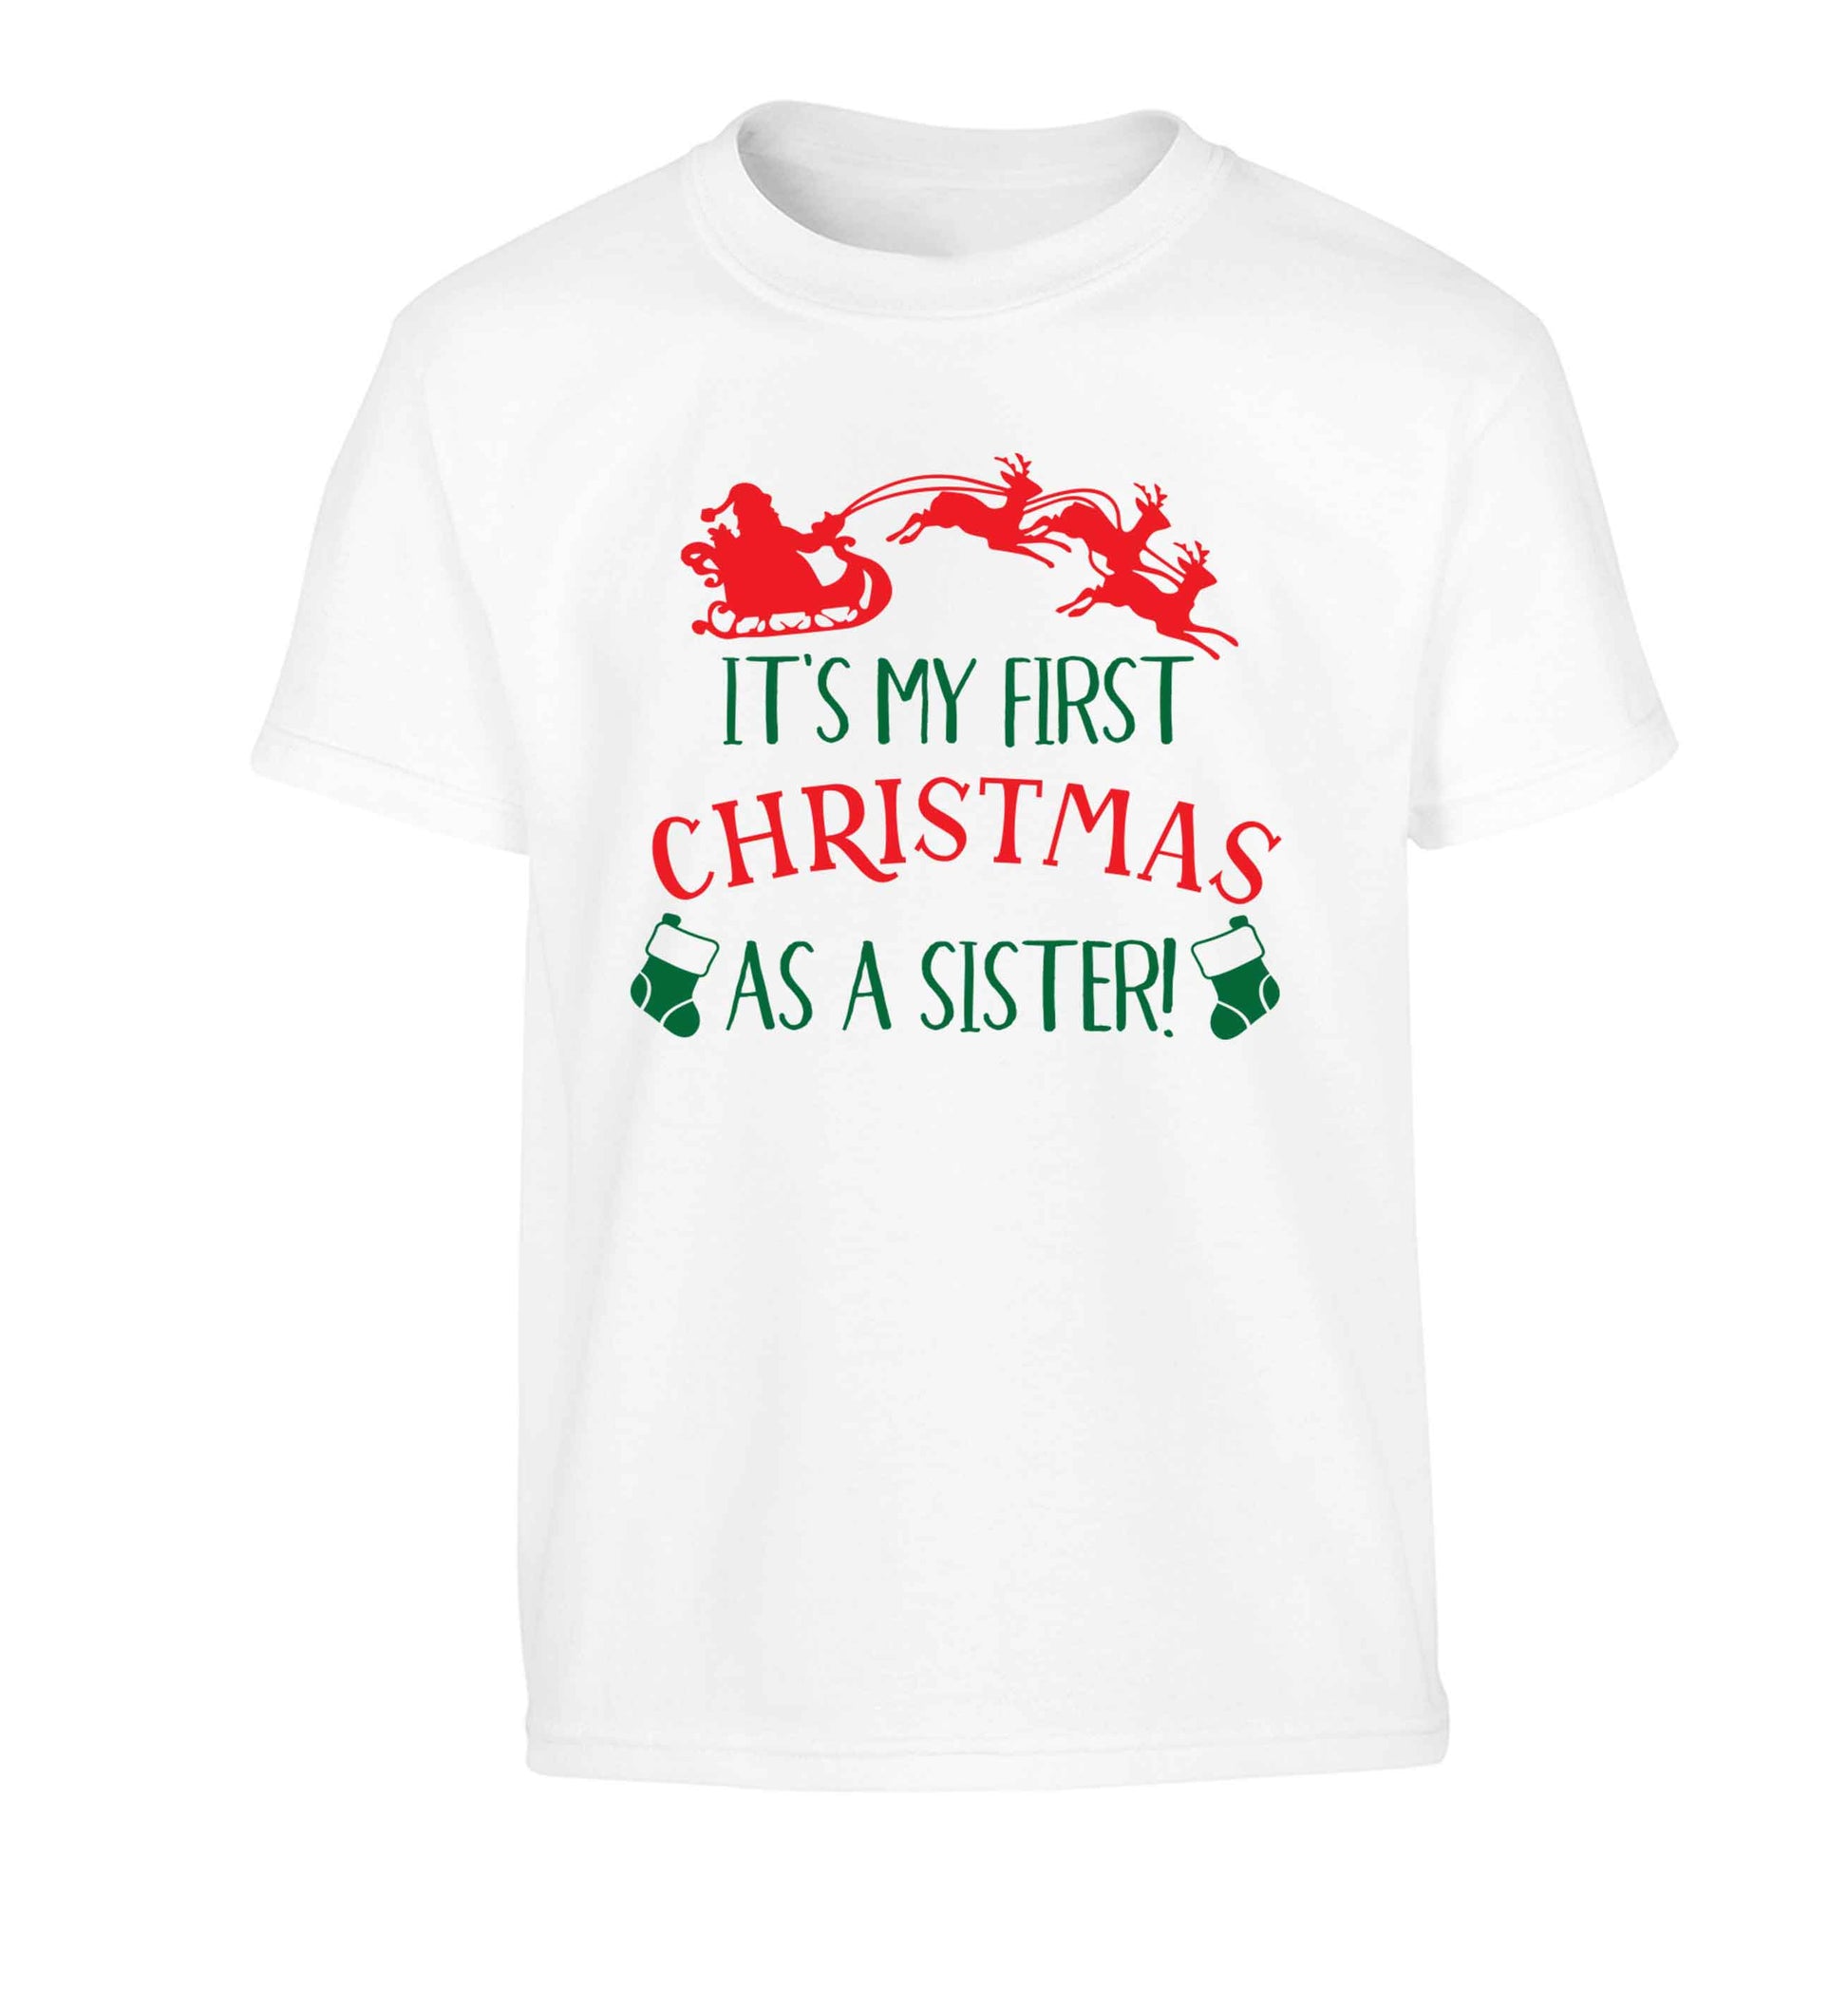 It's my first Christmas as a sister! Children's white Tshirt 12-13 Years